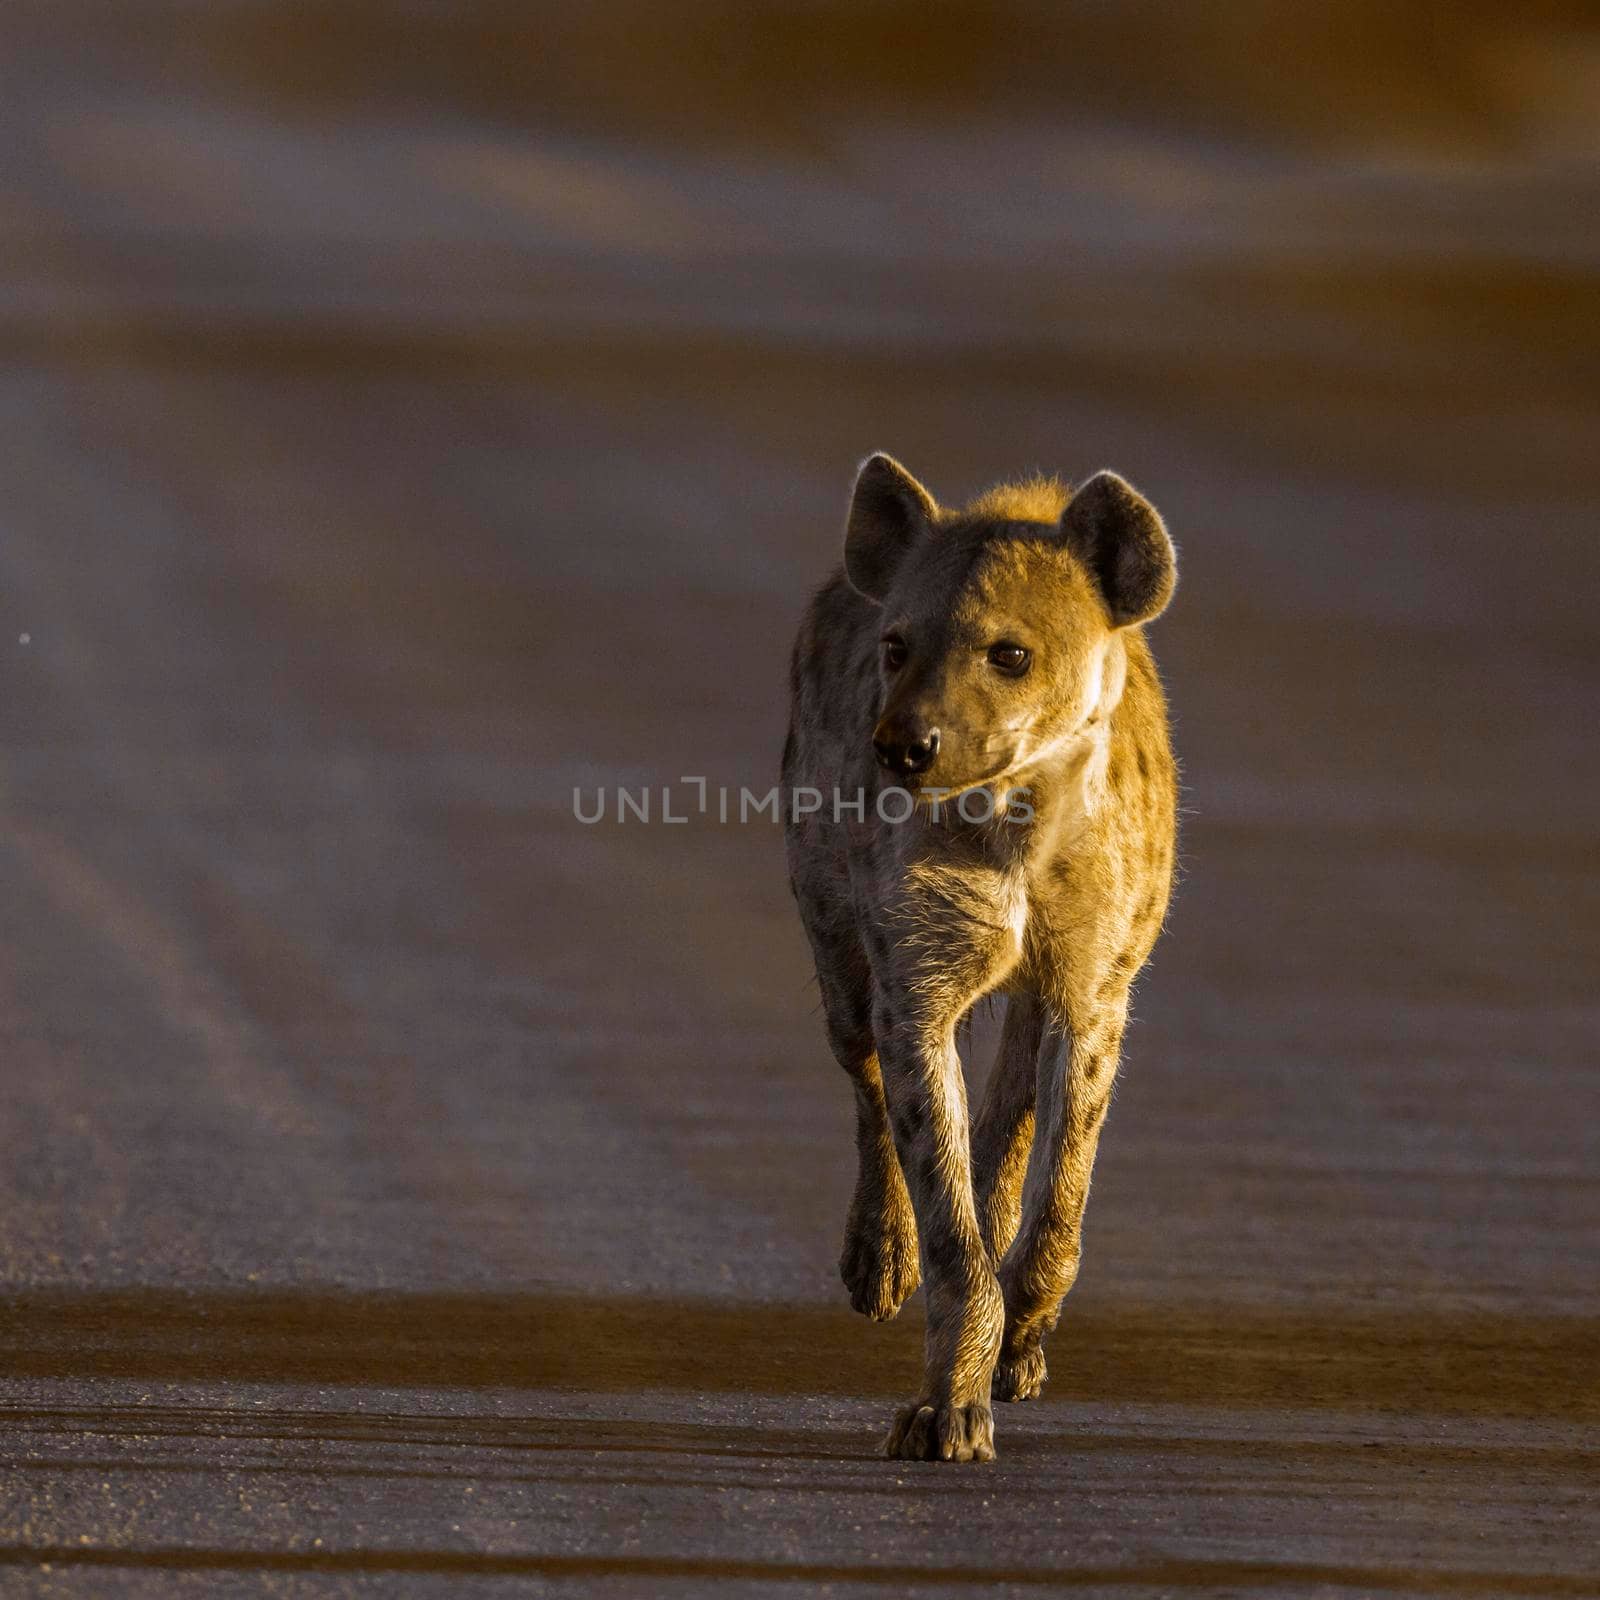 Spotted hyaena in Kruger National park, South Africa by PACOCOMO